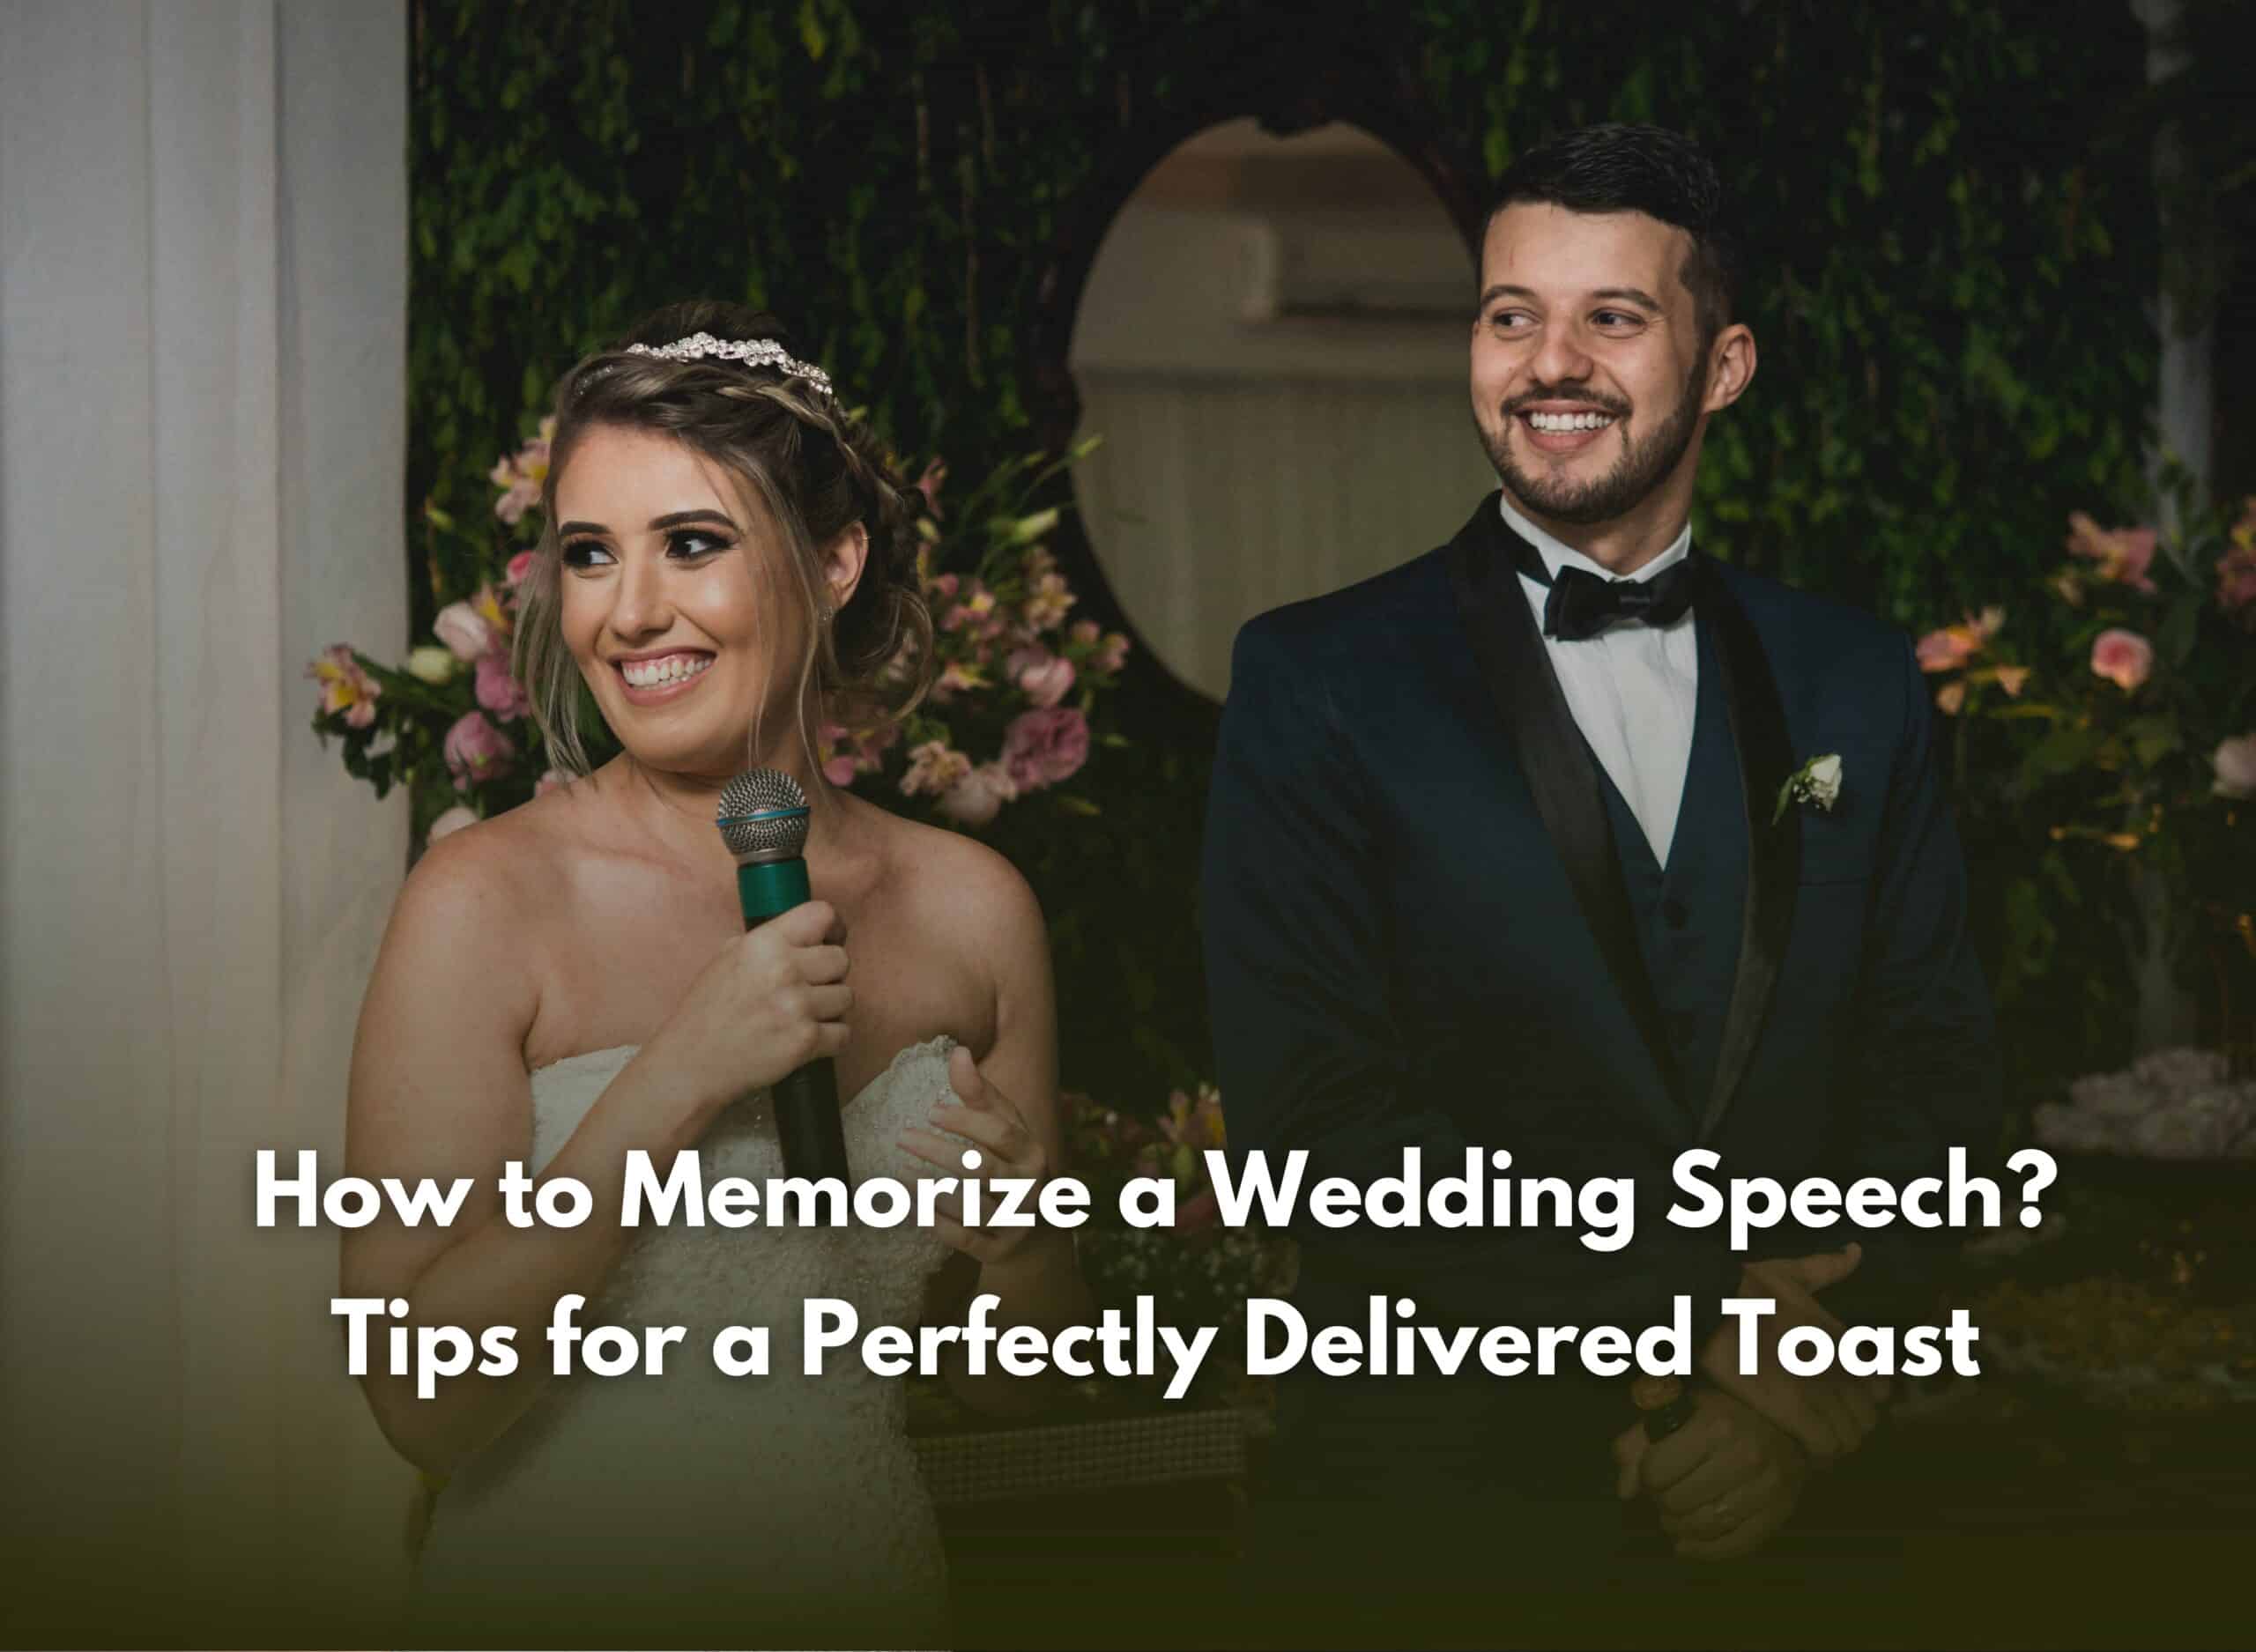 How To Memorize A Wedding Speech? Tips For A Perfectly Delivered Toast